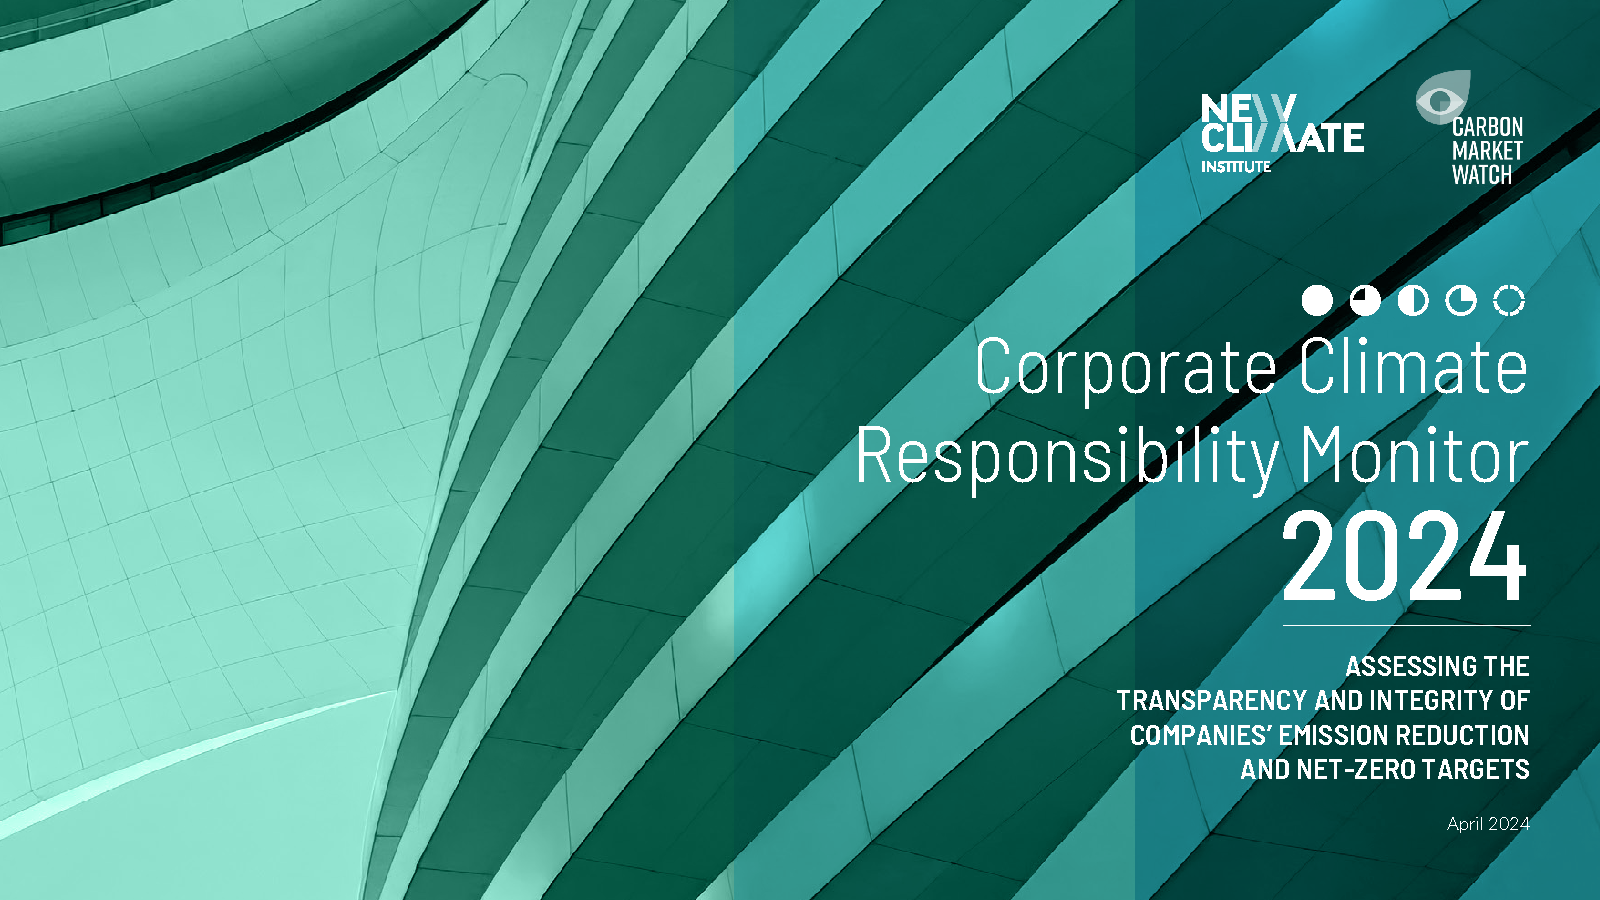 Corporate Climate Responsibility Monitor (CCRM) 2024 